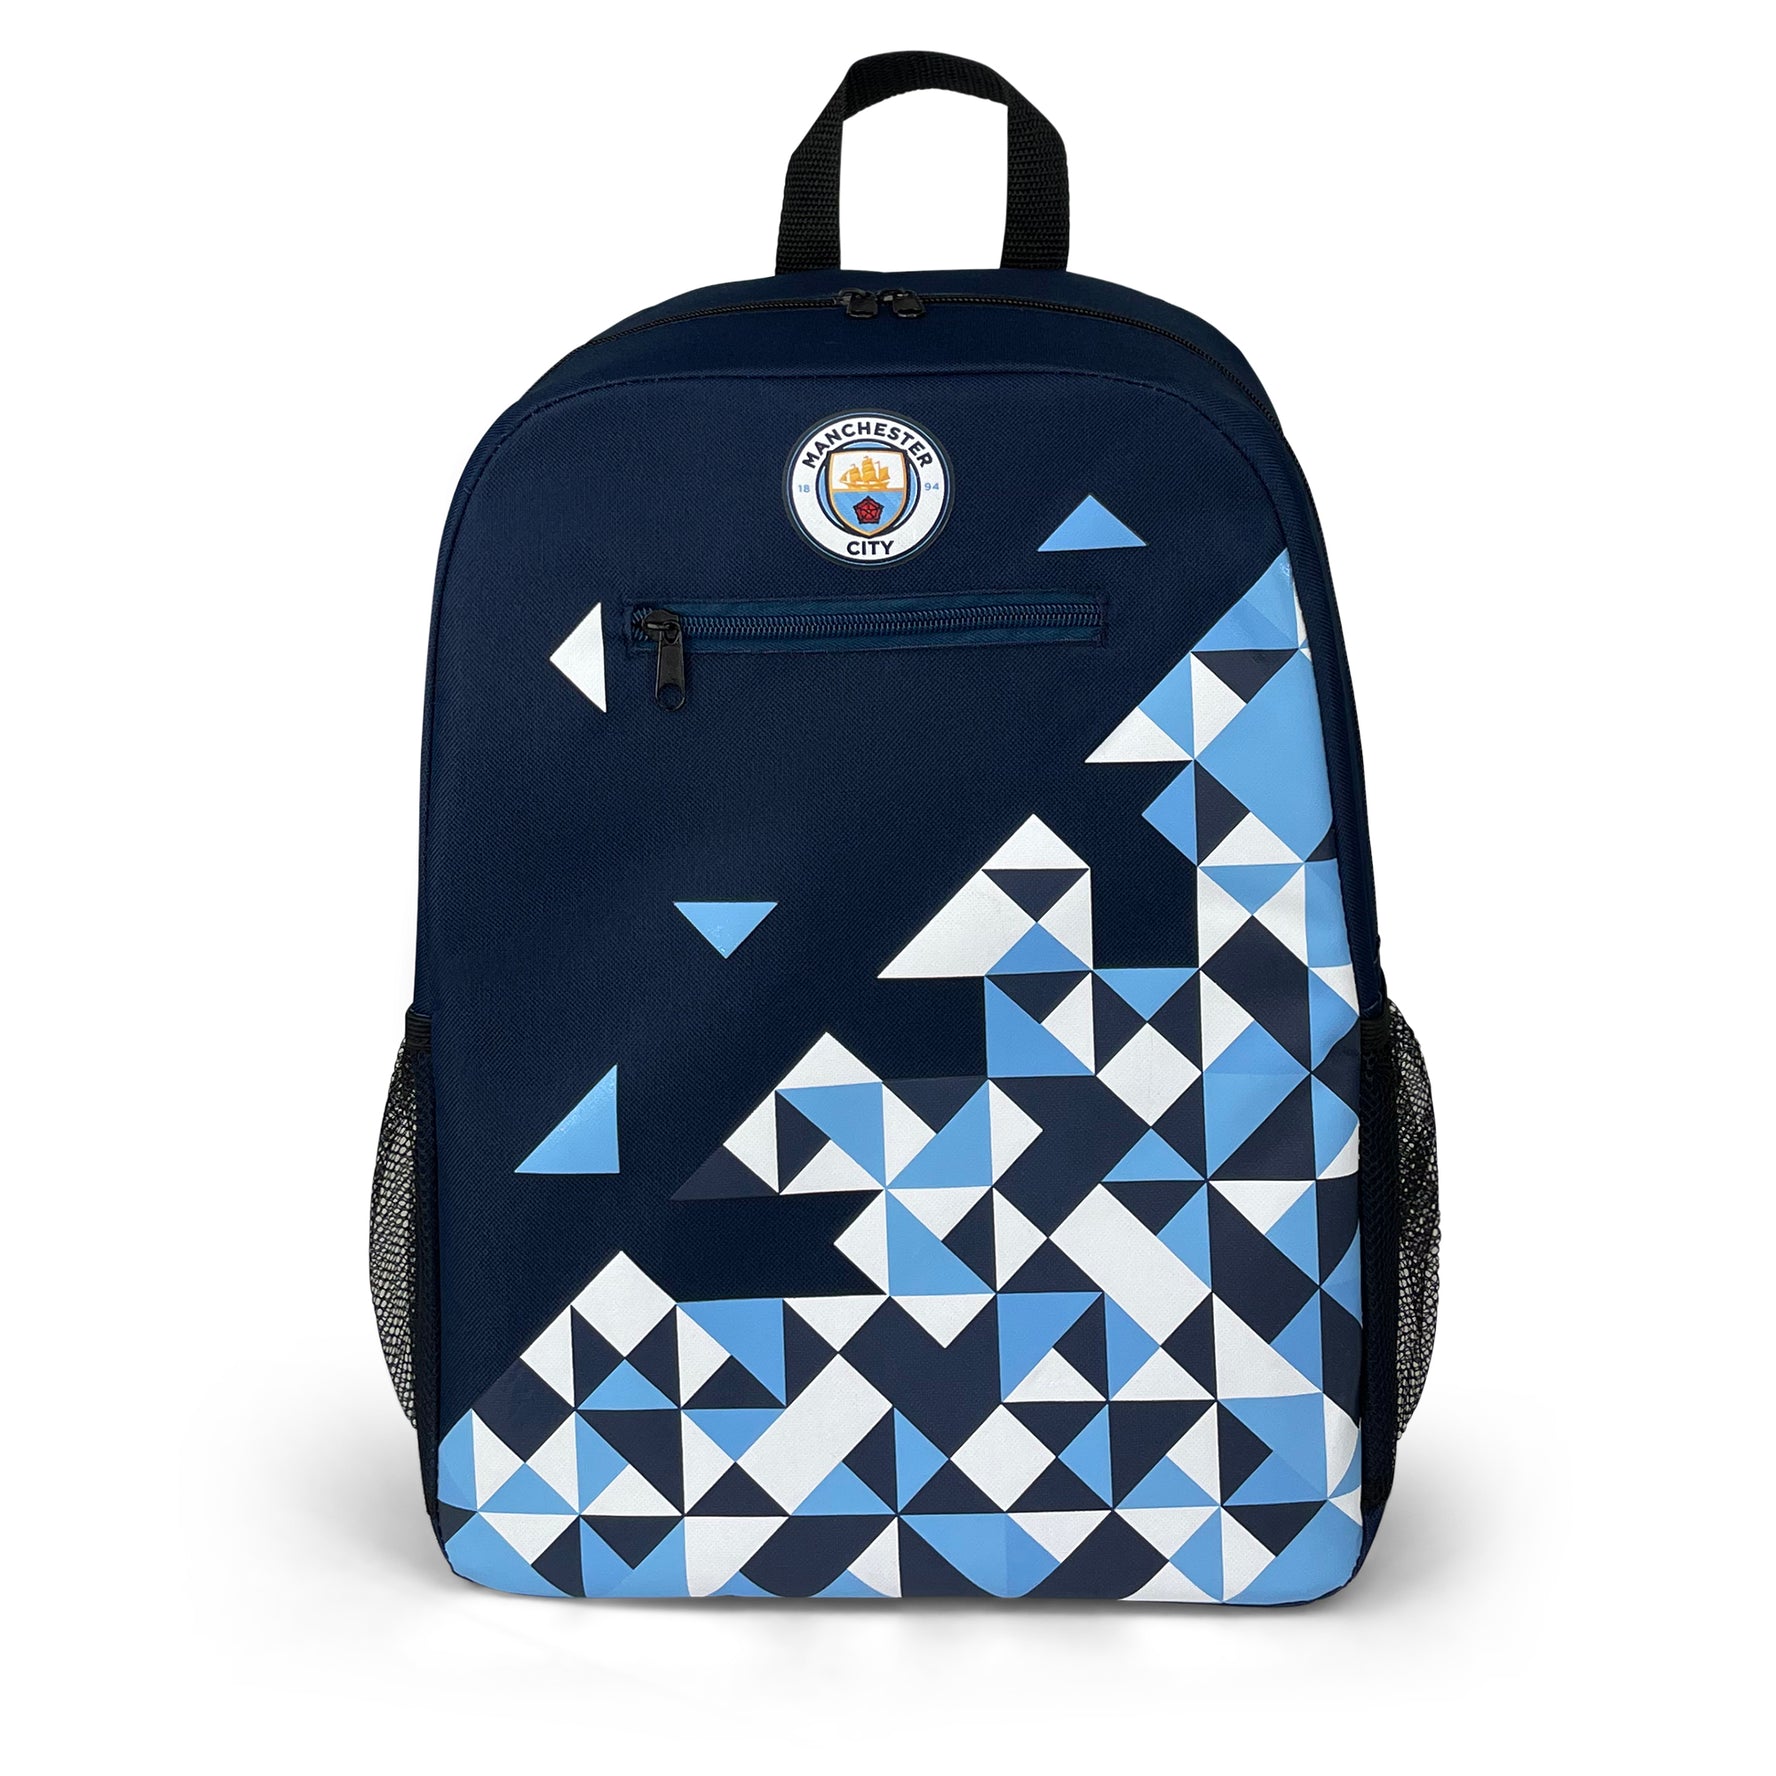 Particle Football Backpack-Backpack-Football Backpacks-Manchester City FC-SchoolBagsAndStuff